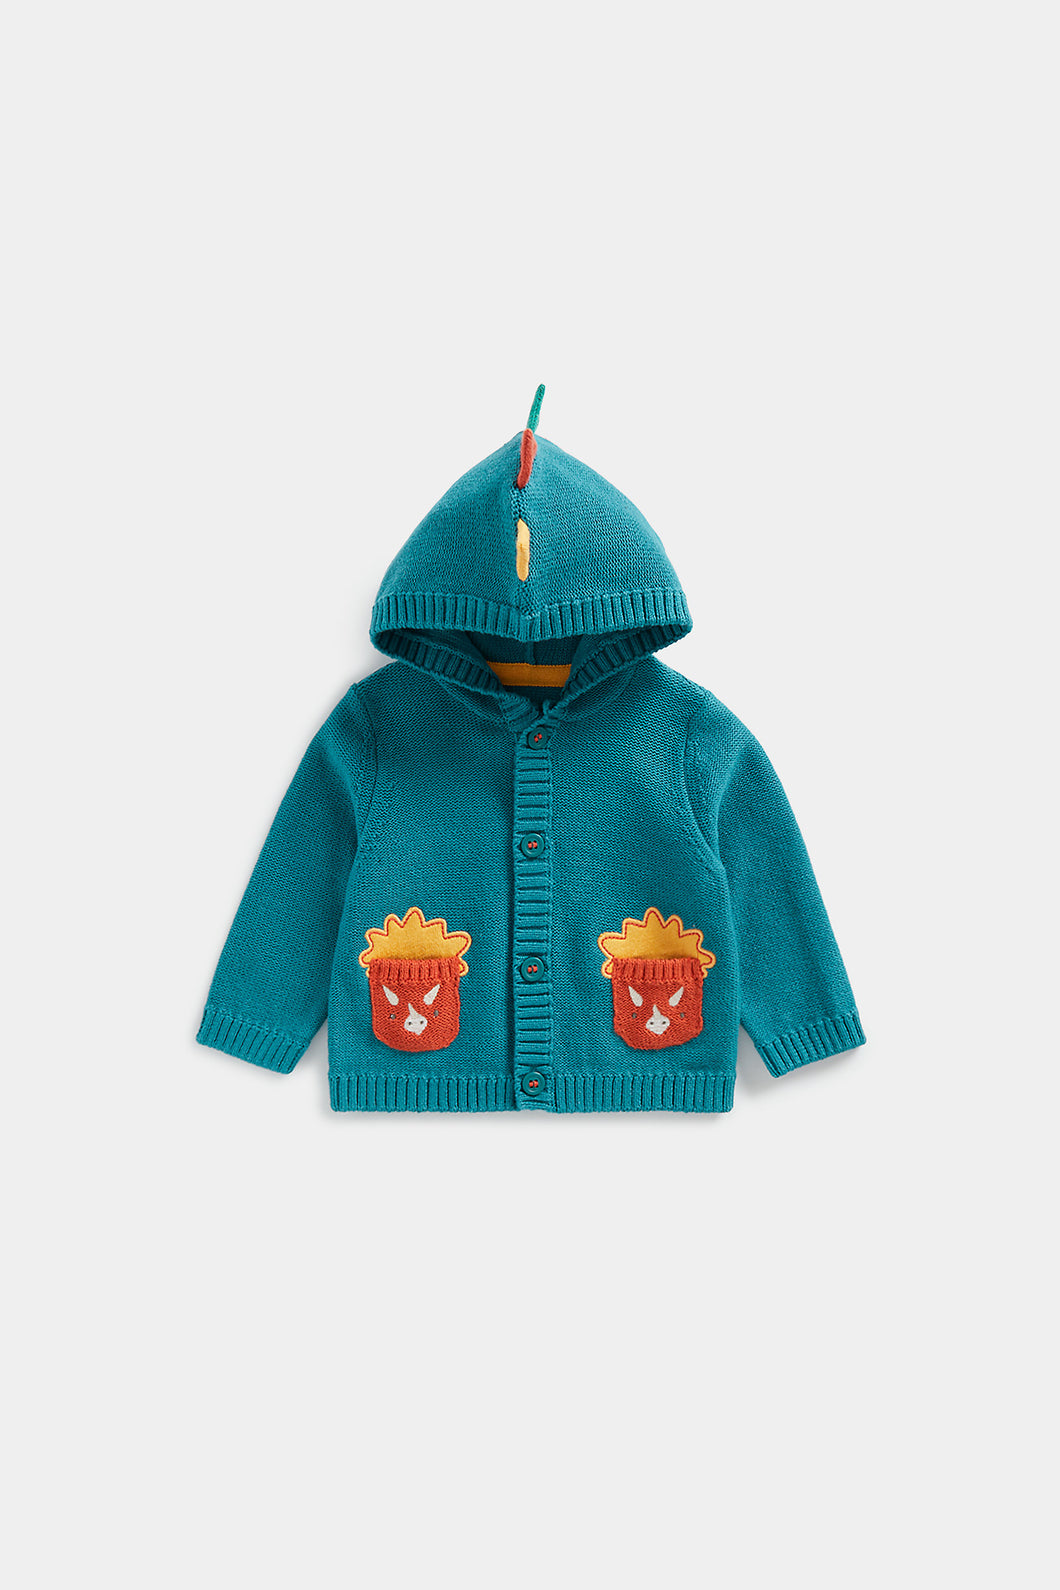 Mothercare Dinosaur Knitted Cardigan